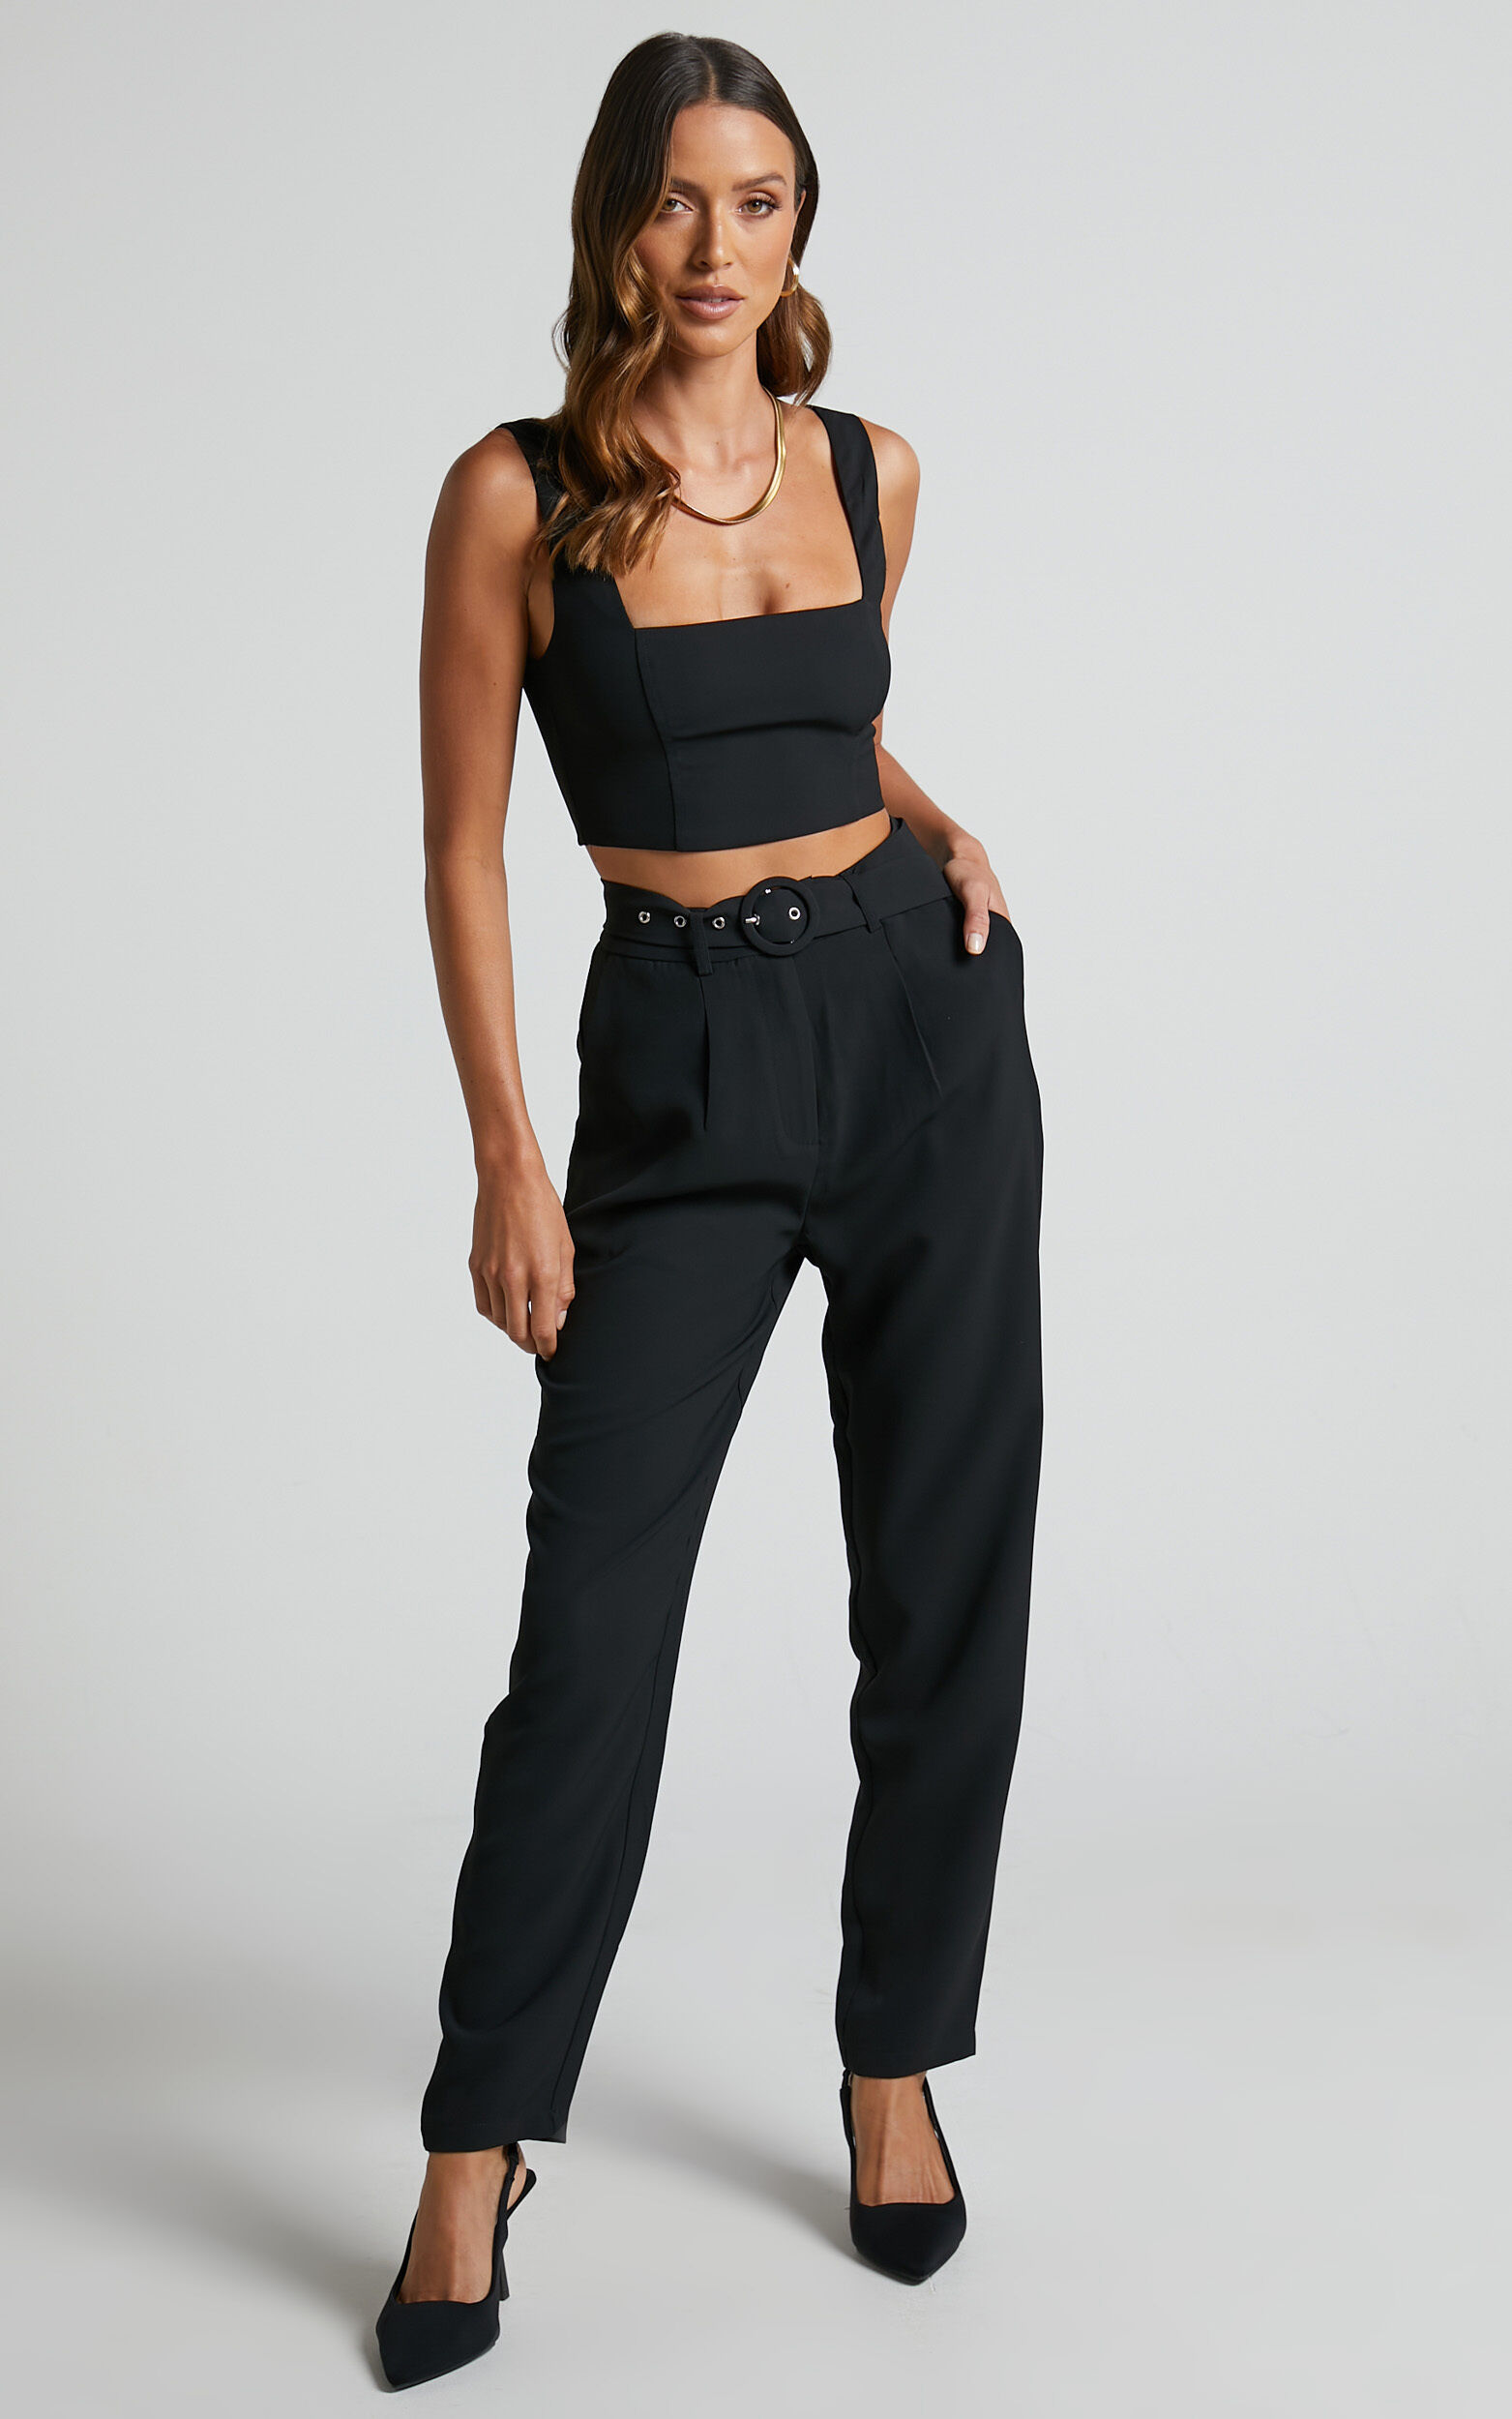 Reyna Two Piece Set - Crop Top and Tailored Pants in Black - 04, BLK1, super-hi-res image number null